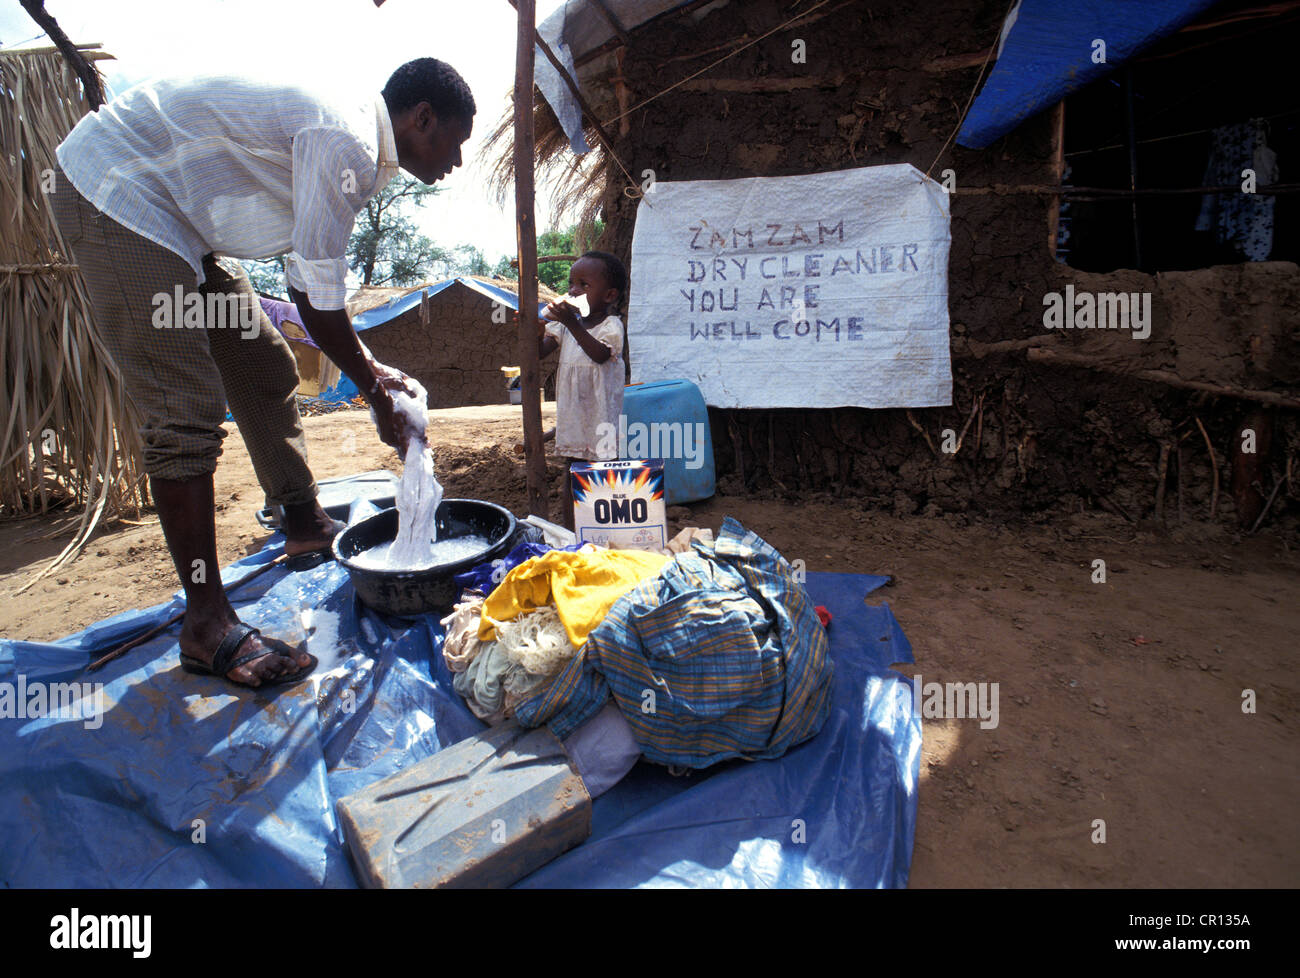 Displaced by the war in southern sudan, Sudanese try to make a new life in Kakuma refugee camp, Northern Kenya. Stock Photo